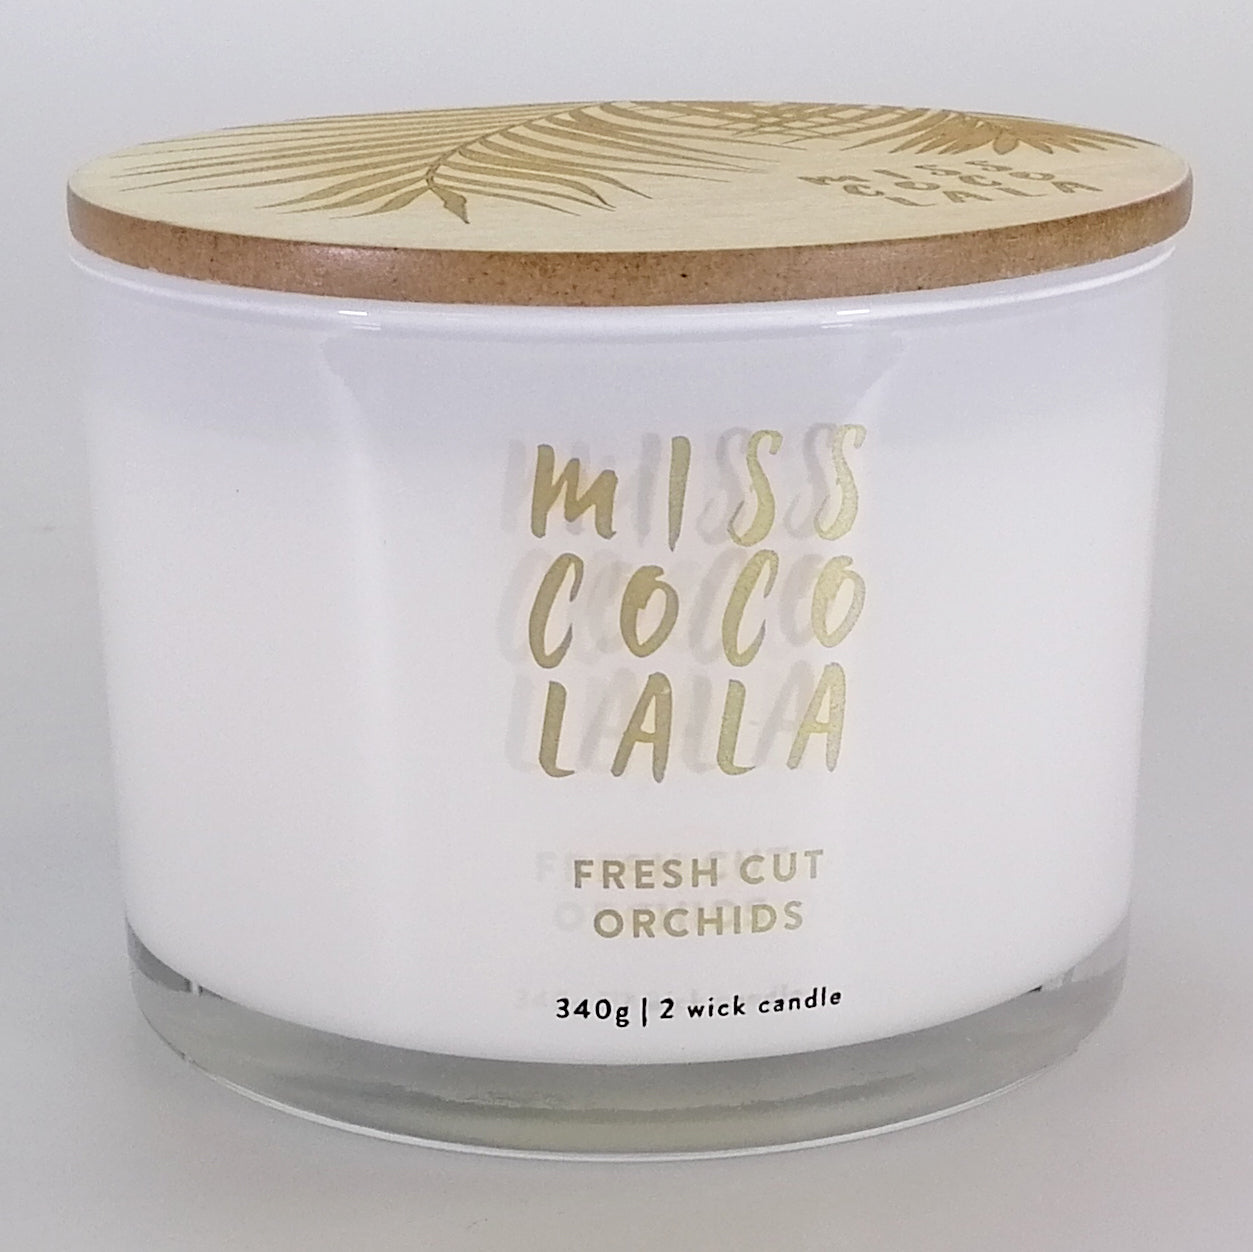 Miss Coco Lala - Coconut Wax Candle - Fresh Cut Orchids - 340g